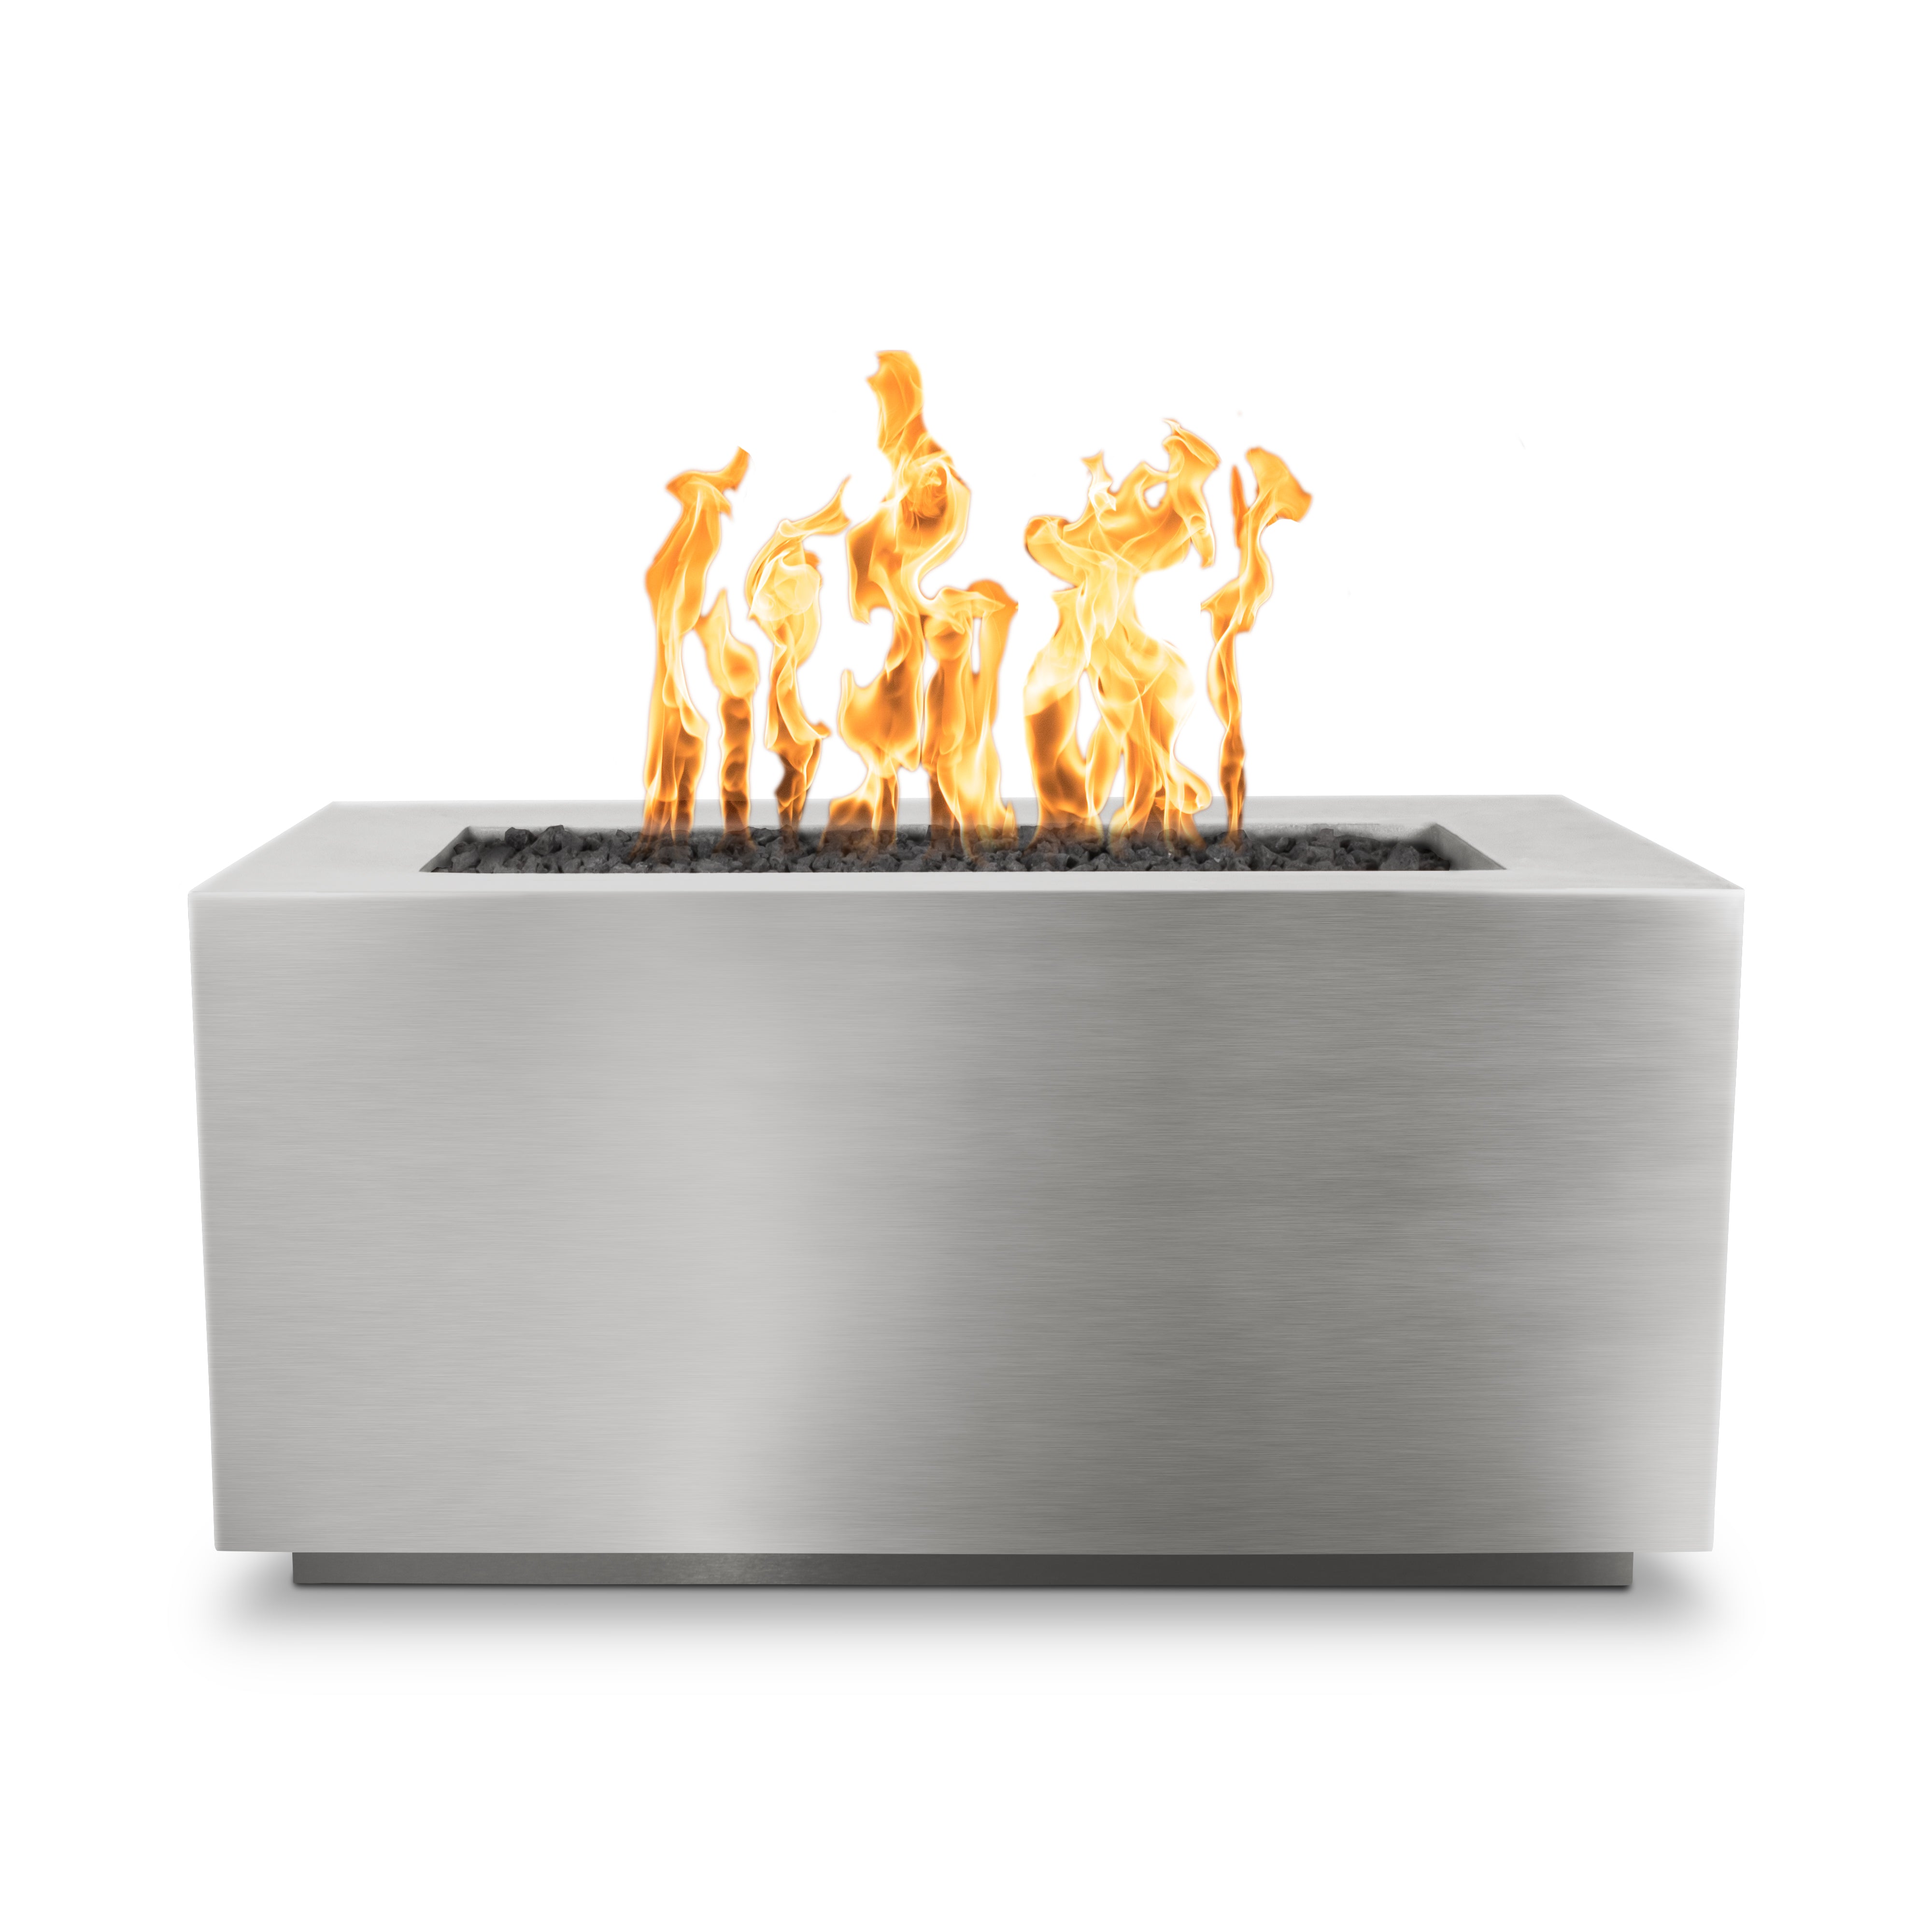 The Outdoor Plus 84" Pismo Fire Pit